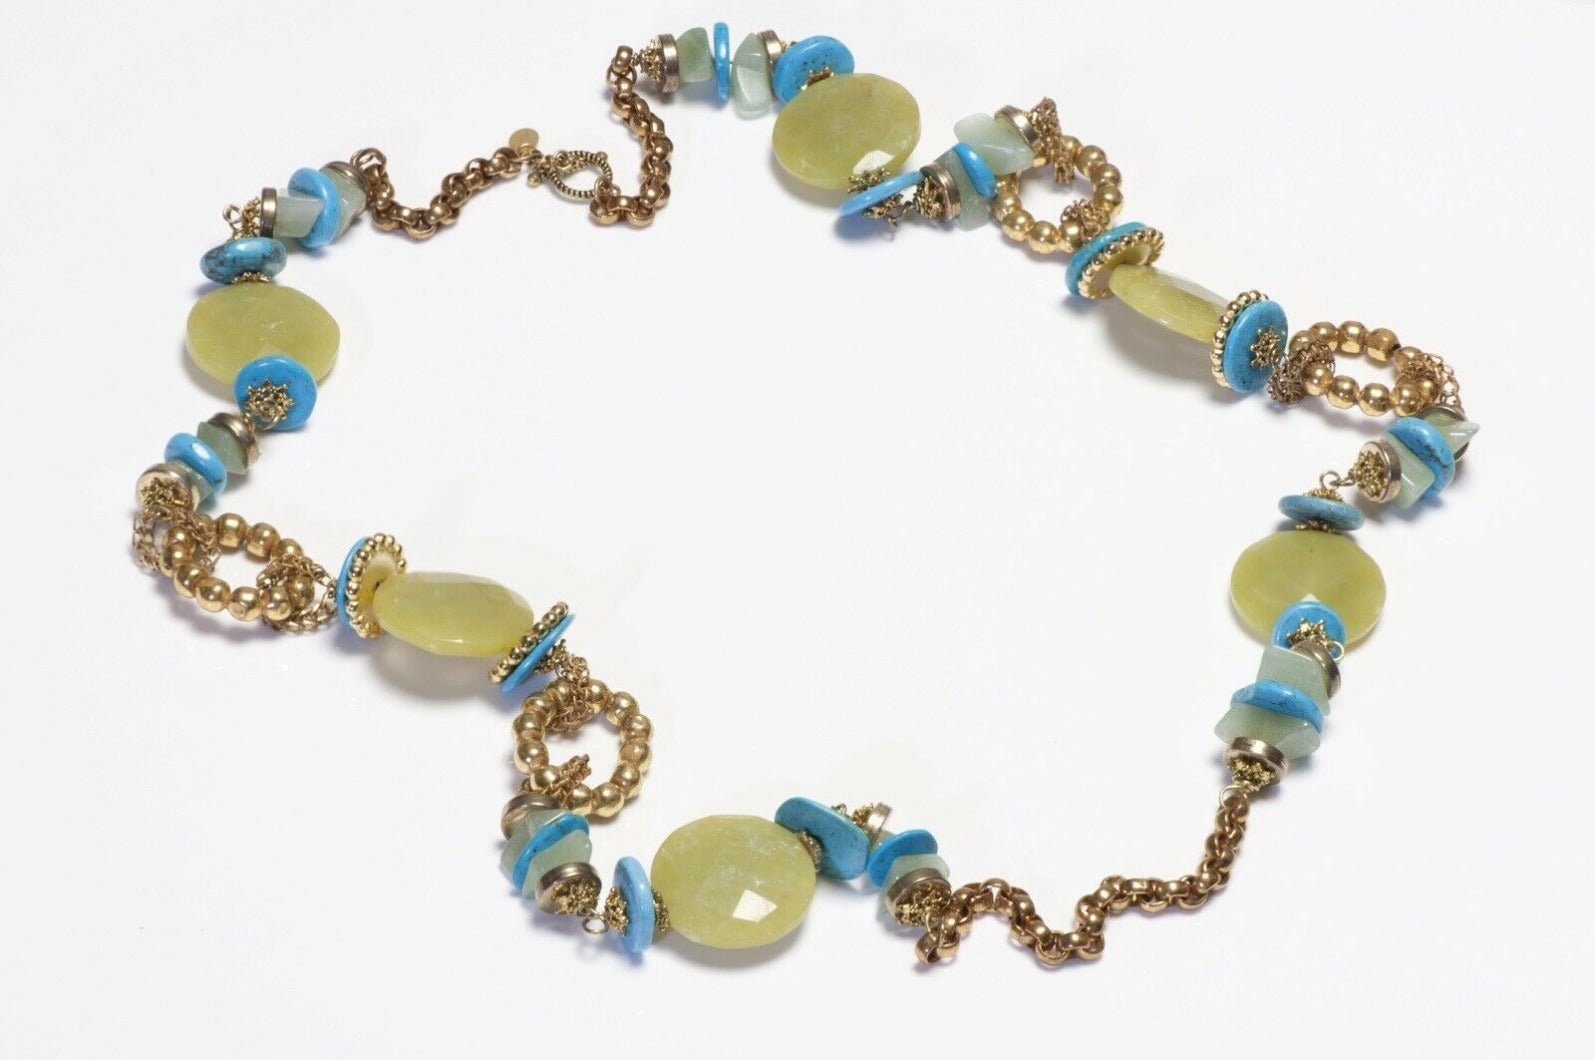 Lawrence Vrba Green Agate Blue Turquoise Beads Chain Necklace